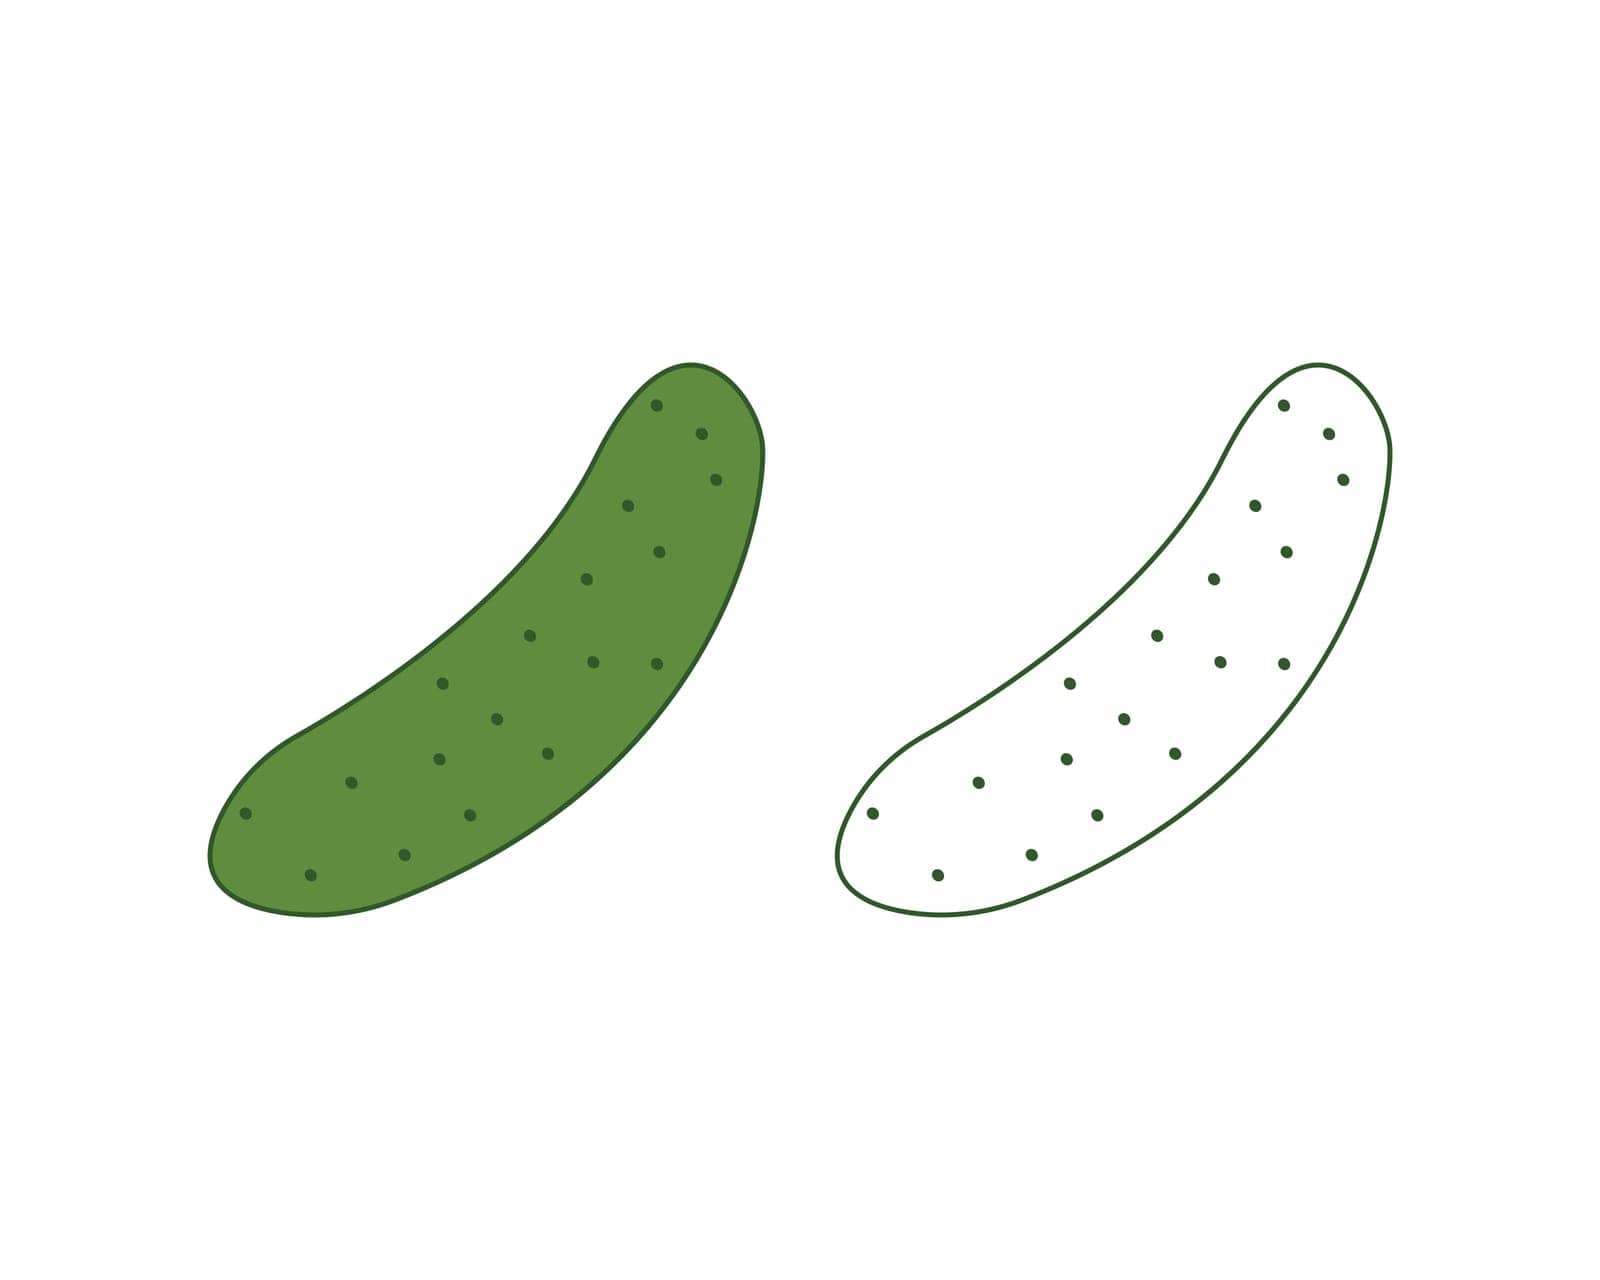 Cucumber coloring book. A ripe green cucumber. A ripe vegetable garden. The image of a cucumber for a children s coloring book. Vector illustration on a white background.